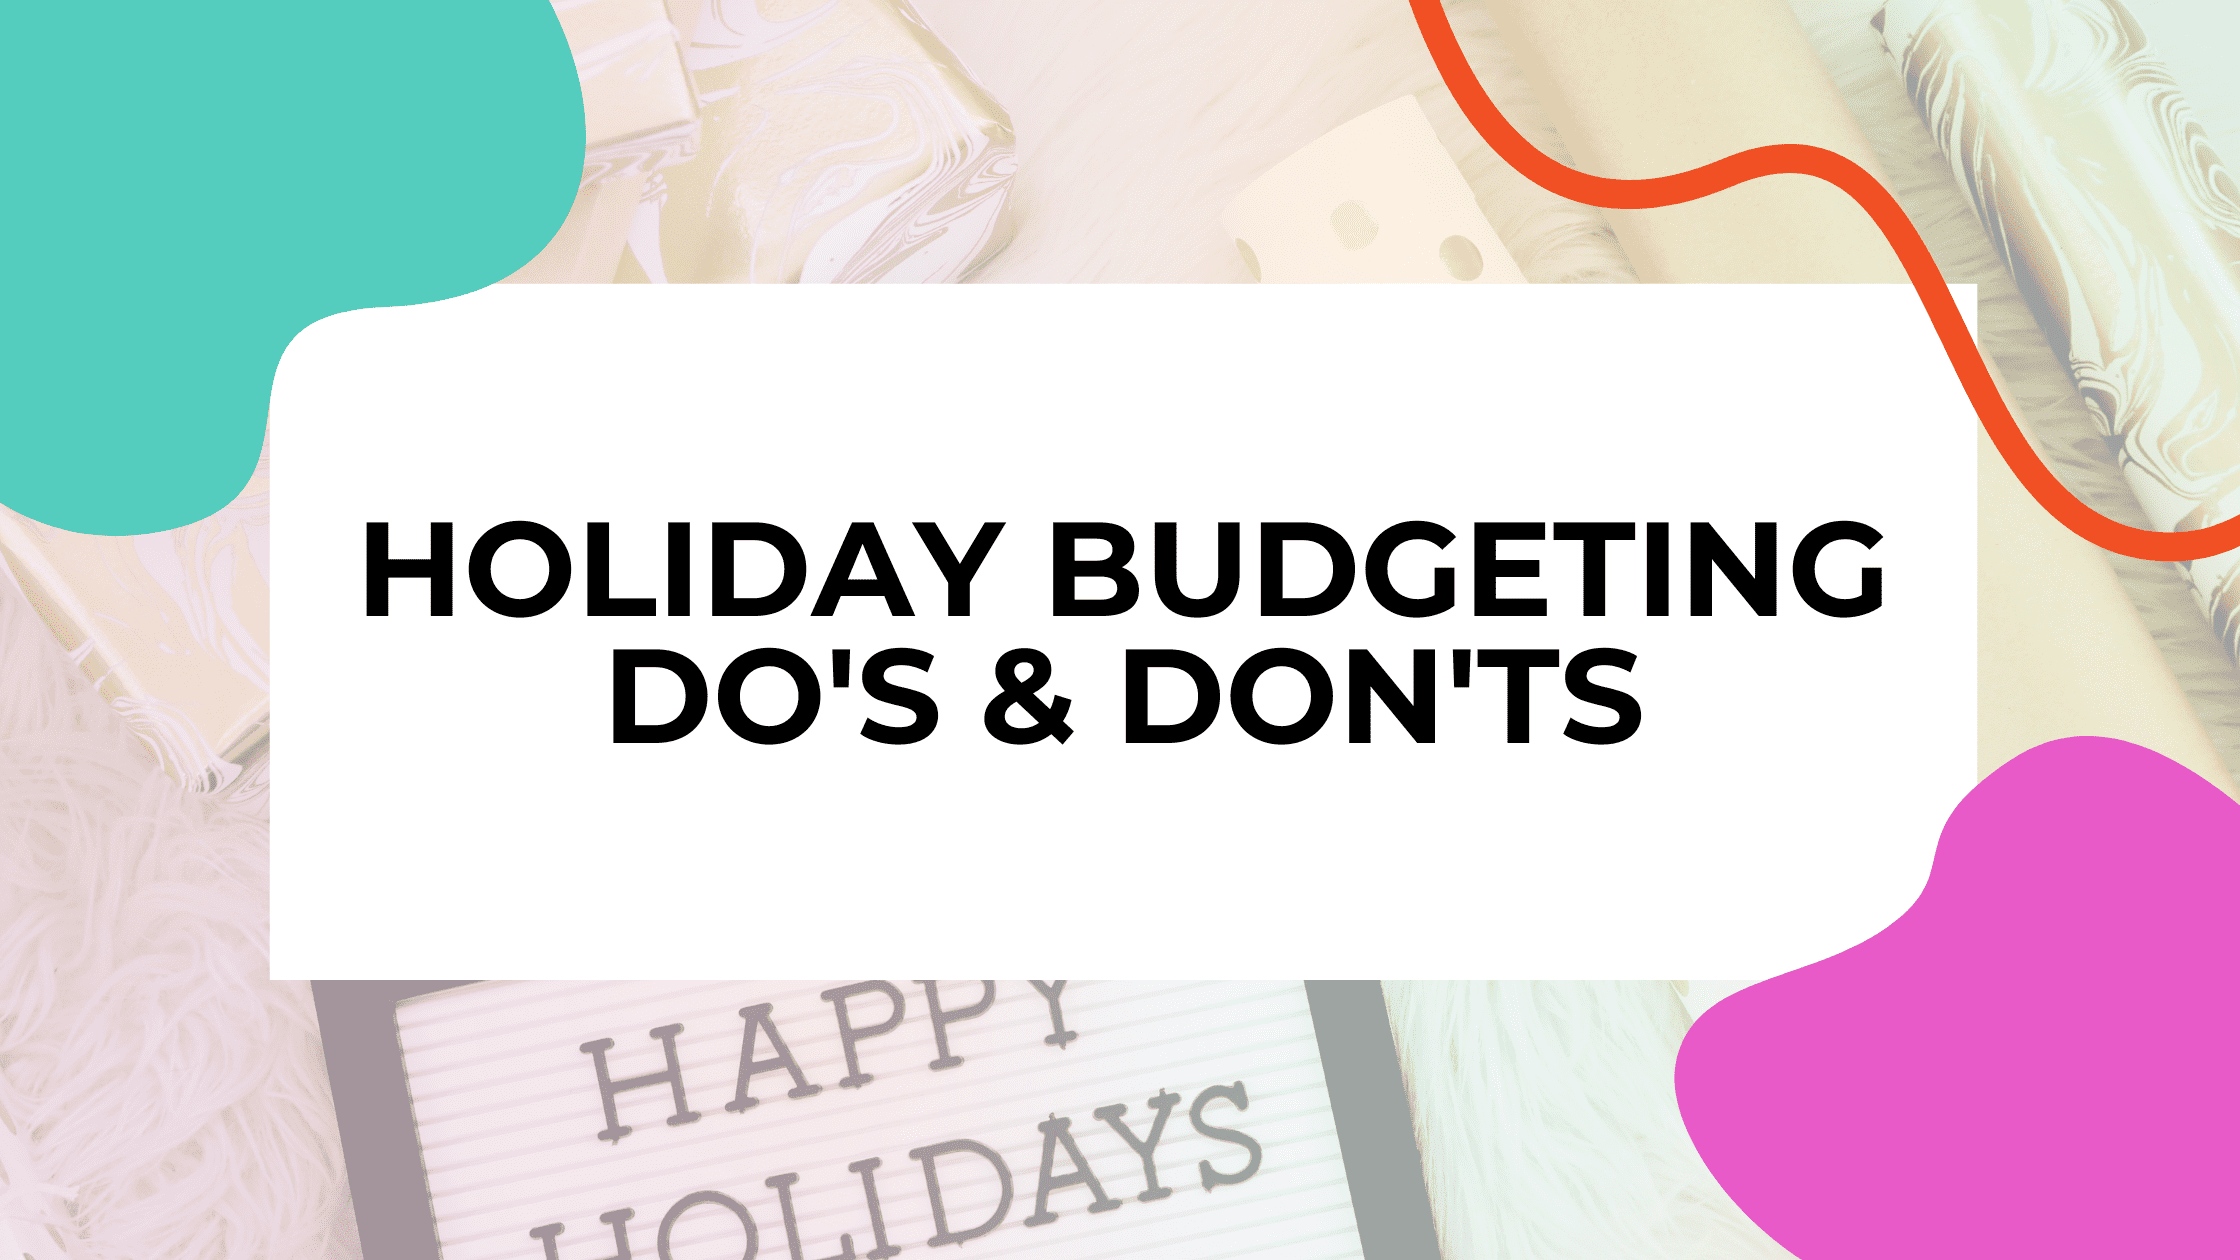 featured imge with holiday wrapping paper and welcome sign with title text overlay that reads holiday budgeting Do's & Don'ts